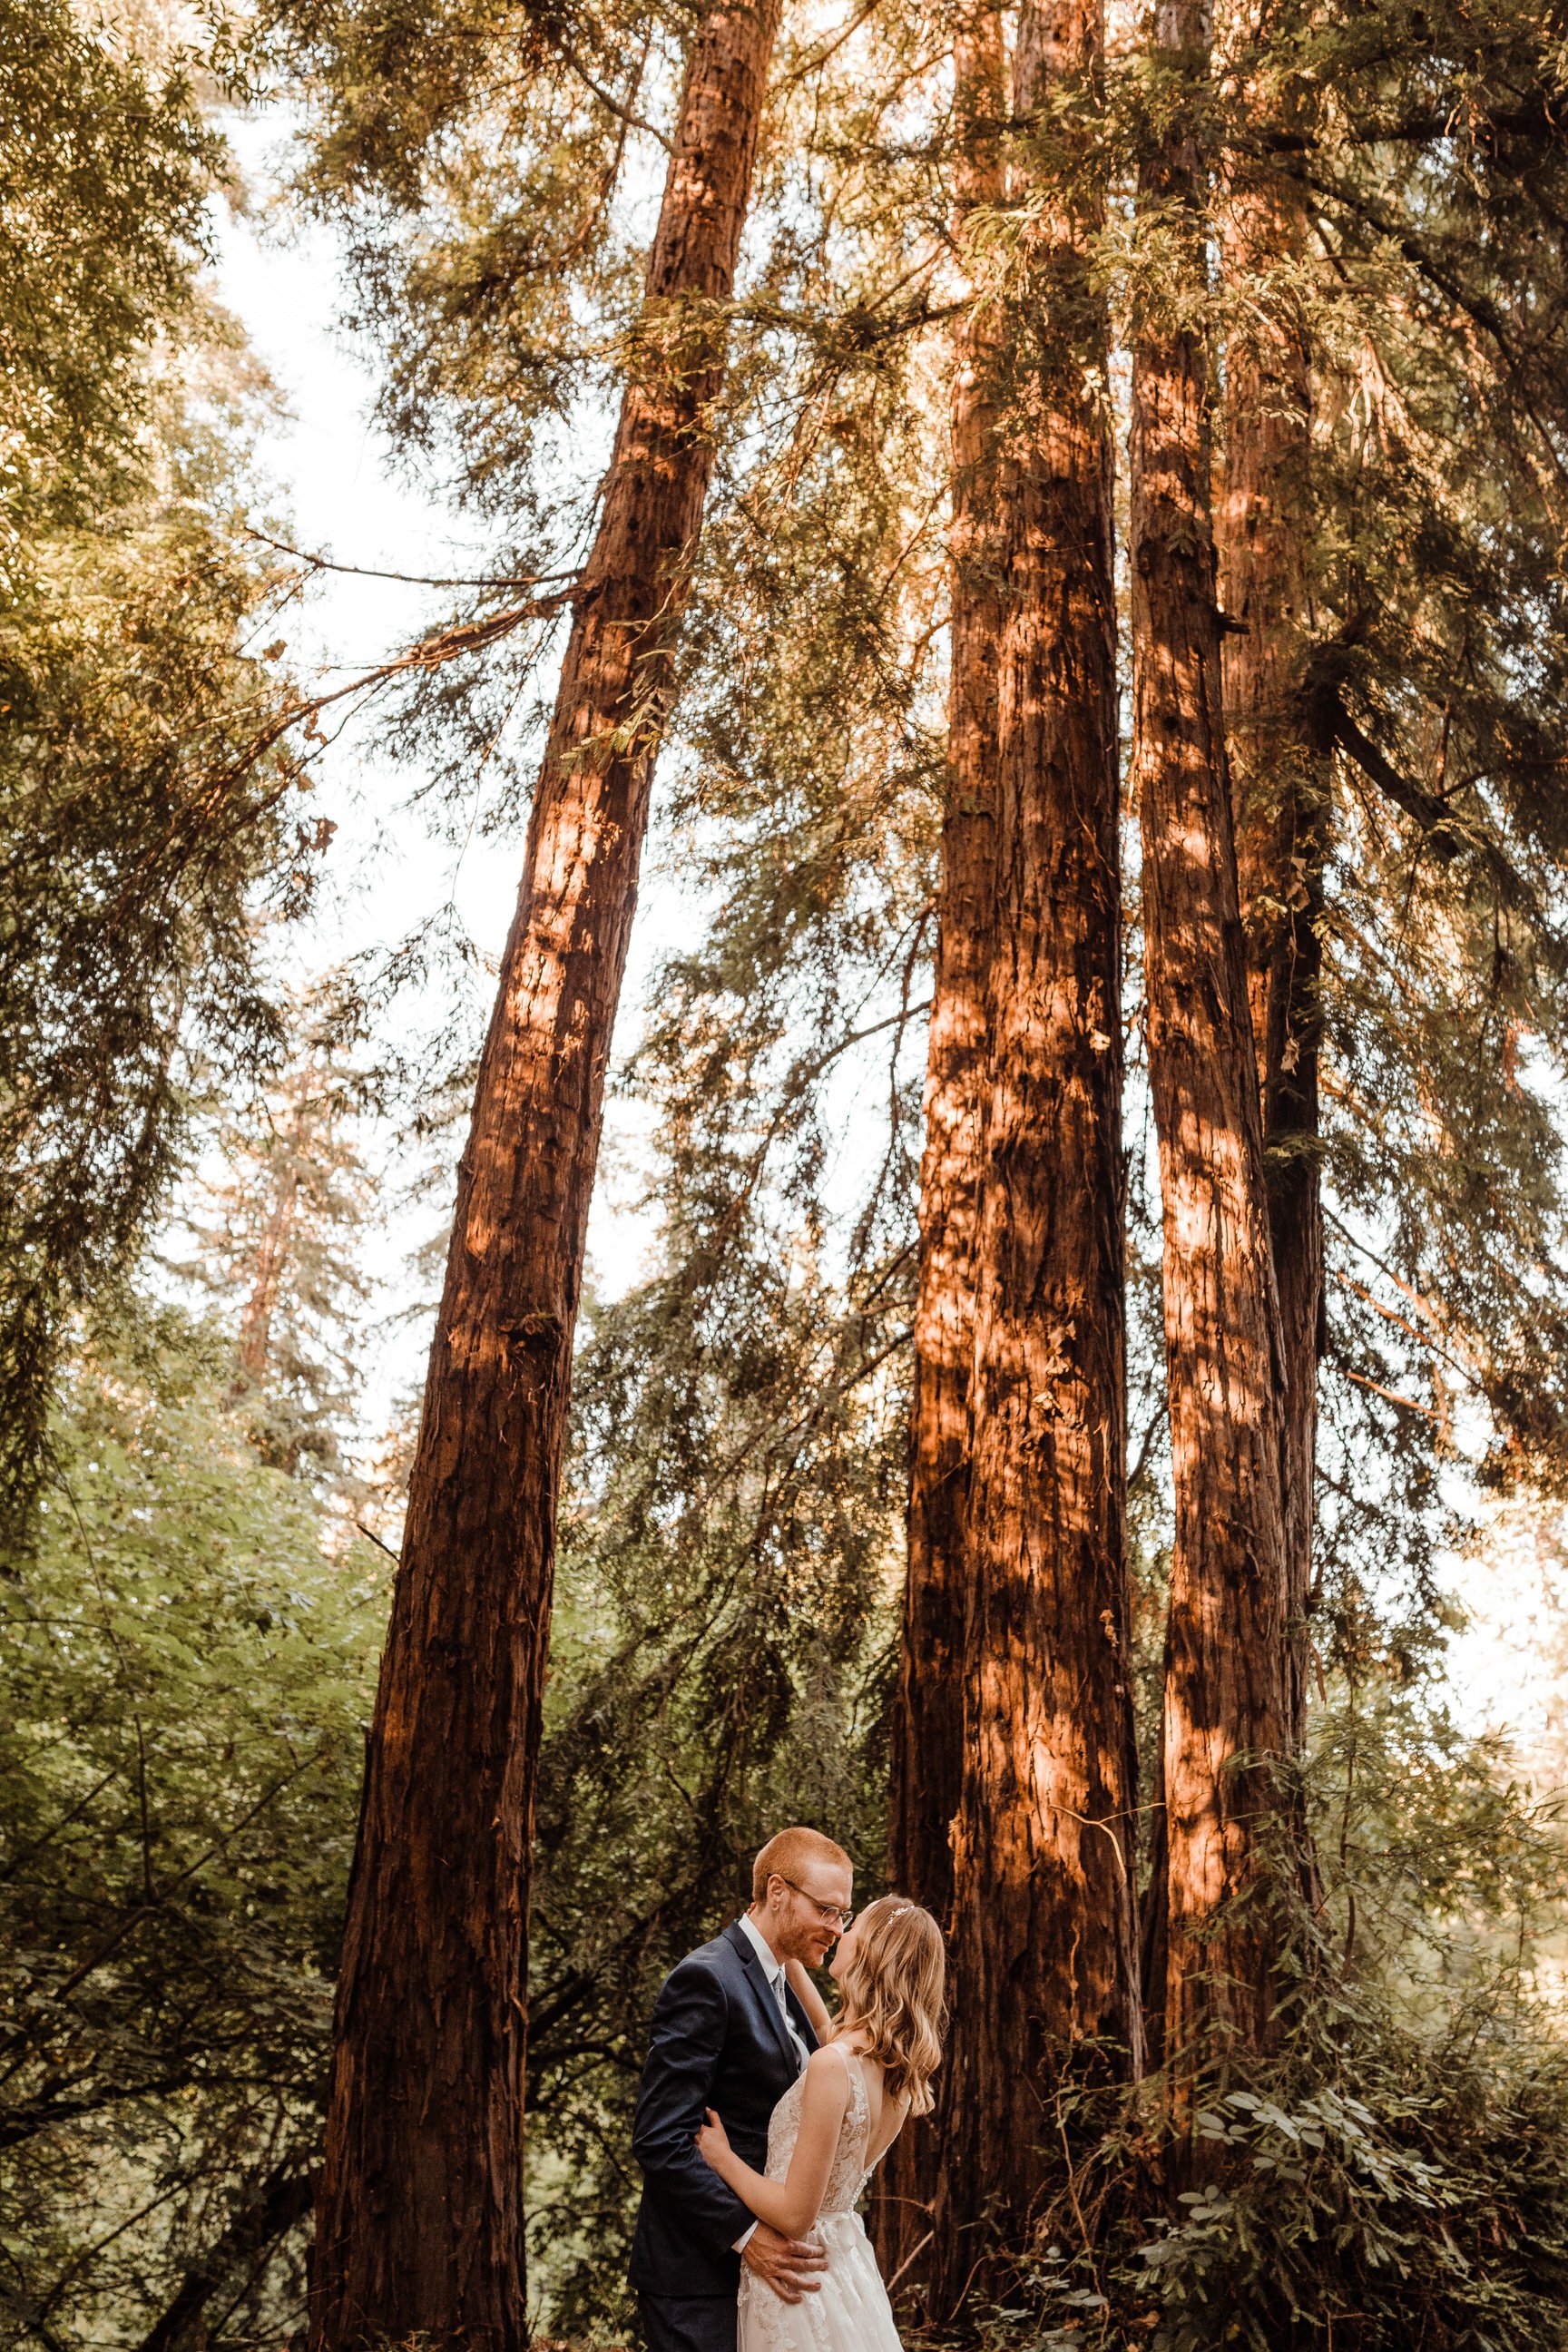 Wedding-in-the-Woods-Bride-and-Groom-Sunlit-Pictures-Beneath-Redwood-Forest (12).jpg